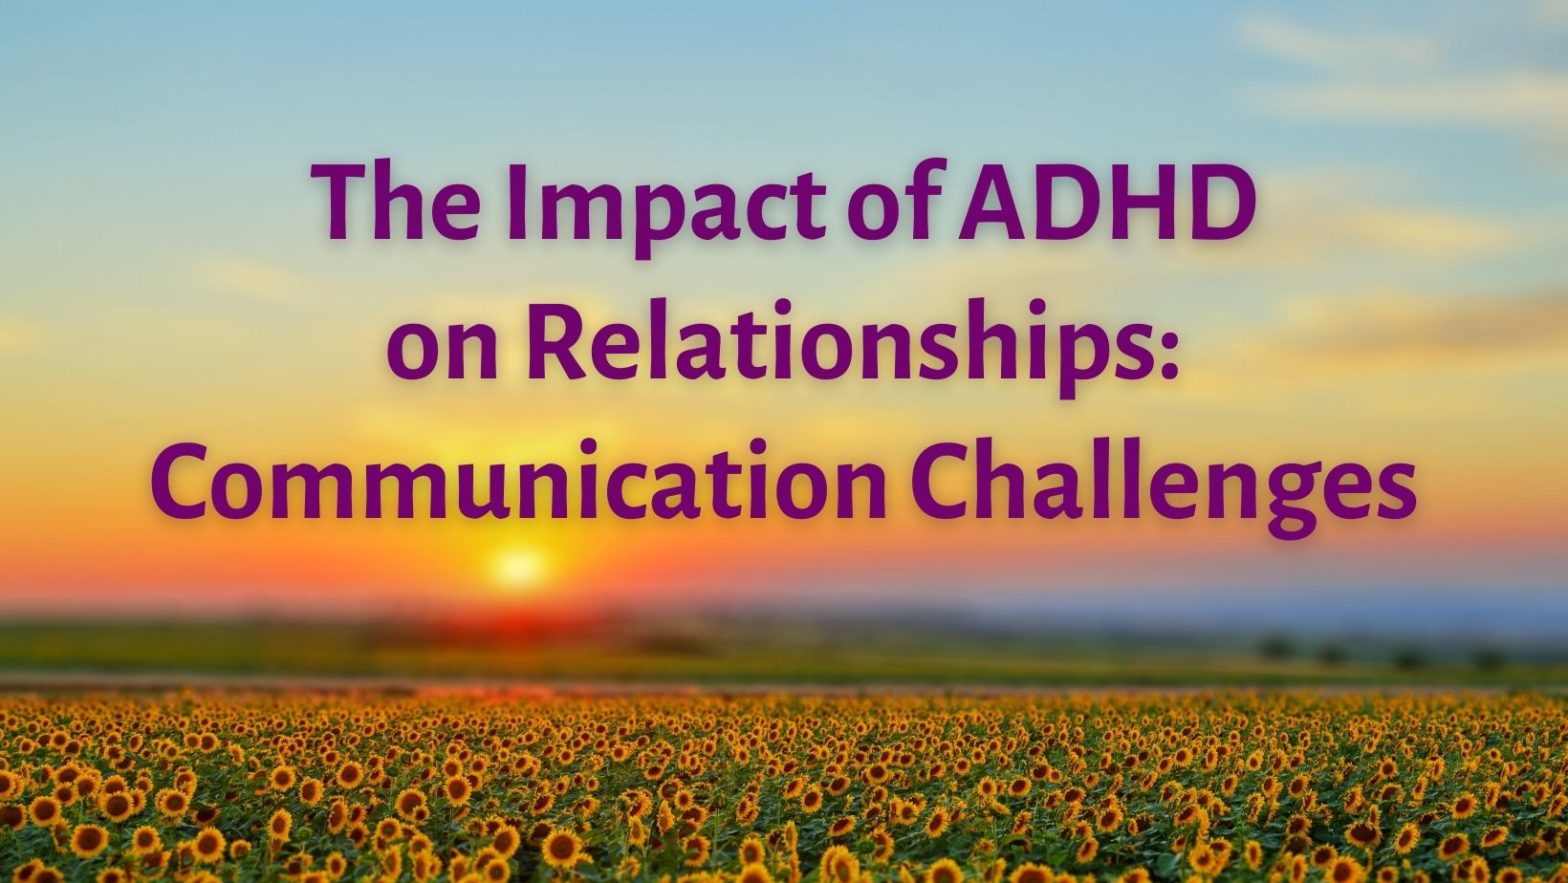 sunset over sunflower field - text reads The Impact of ADHD on Relationships: Communication Challenges